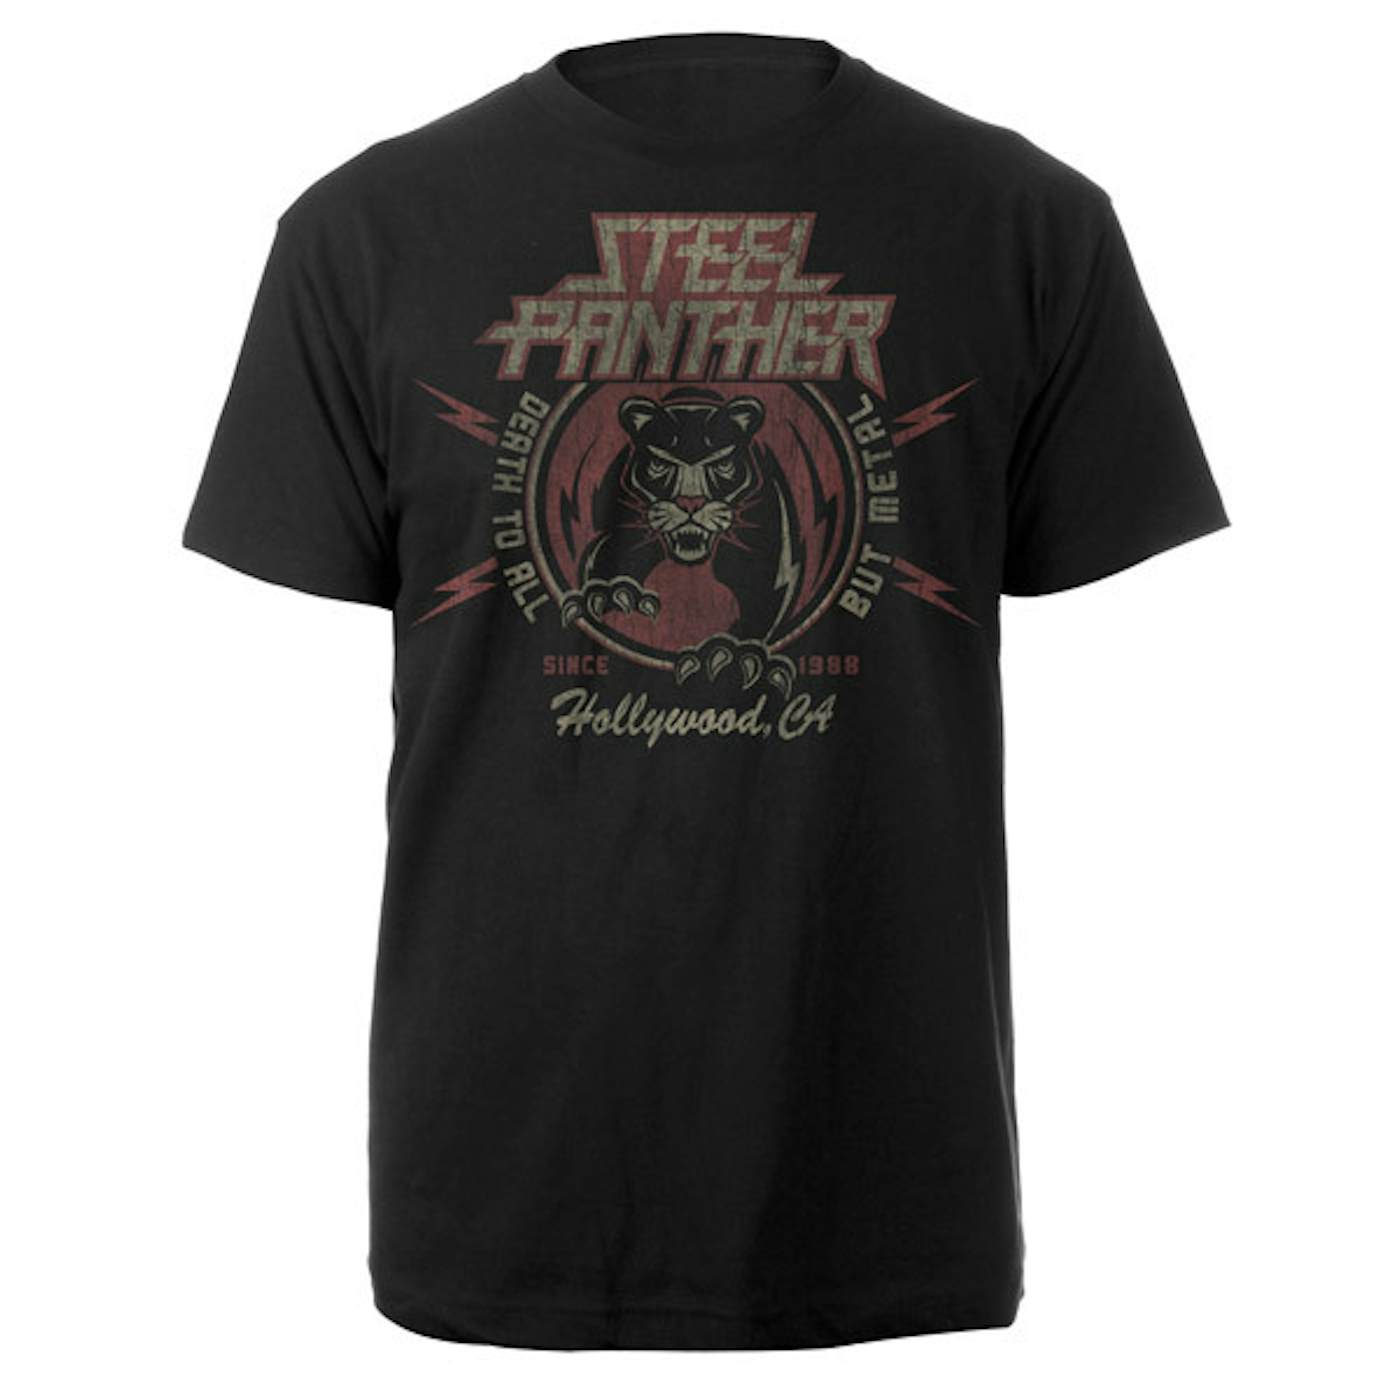 Steel Panther Hollywood, CA Shirt